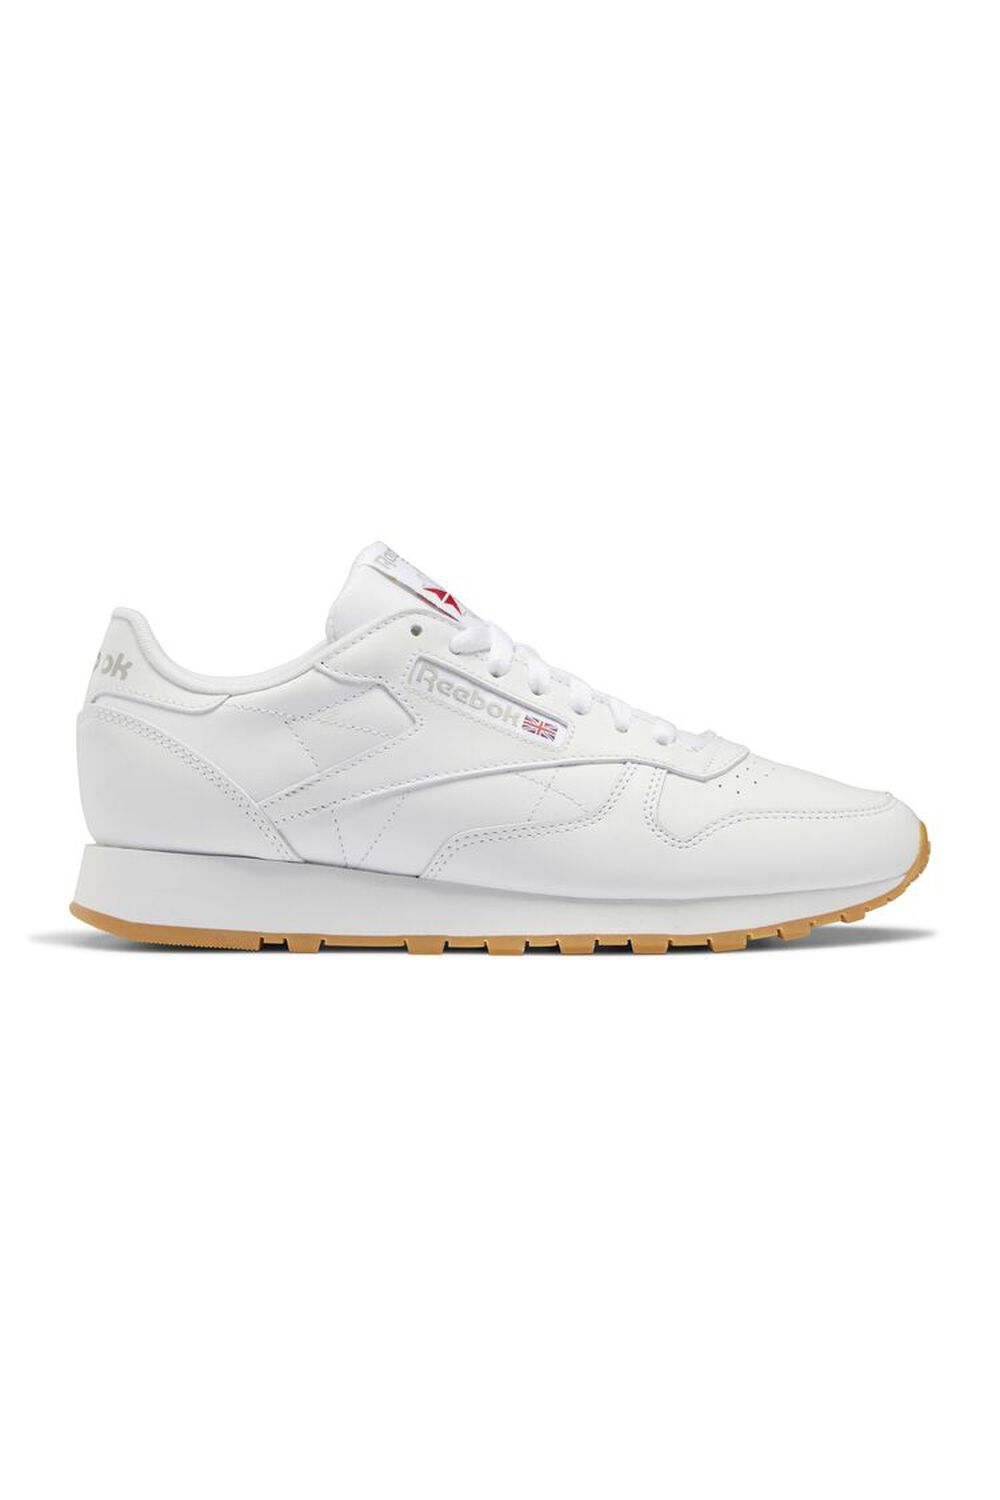 WHITE Men Reebok Classic Leather Shoes, image 2